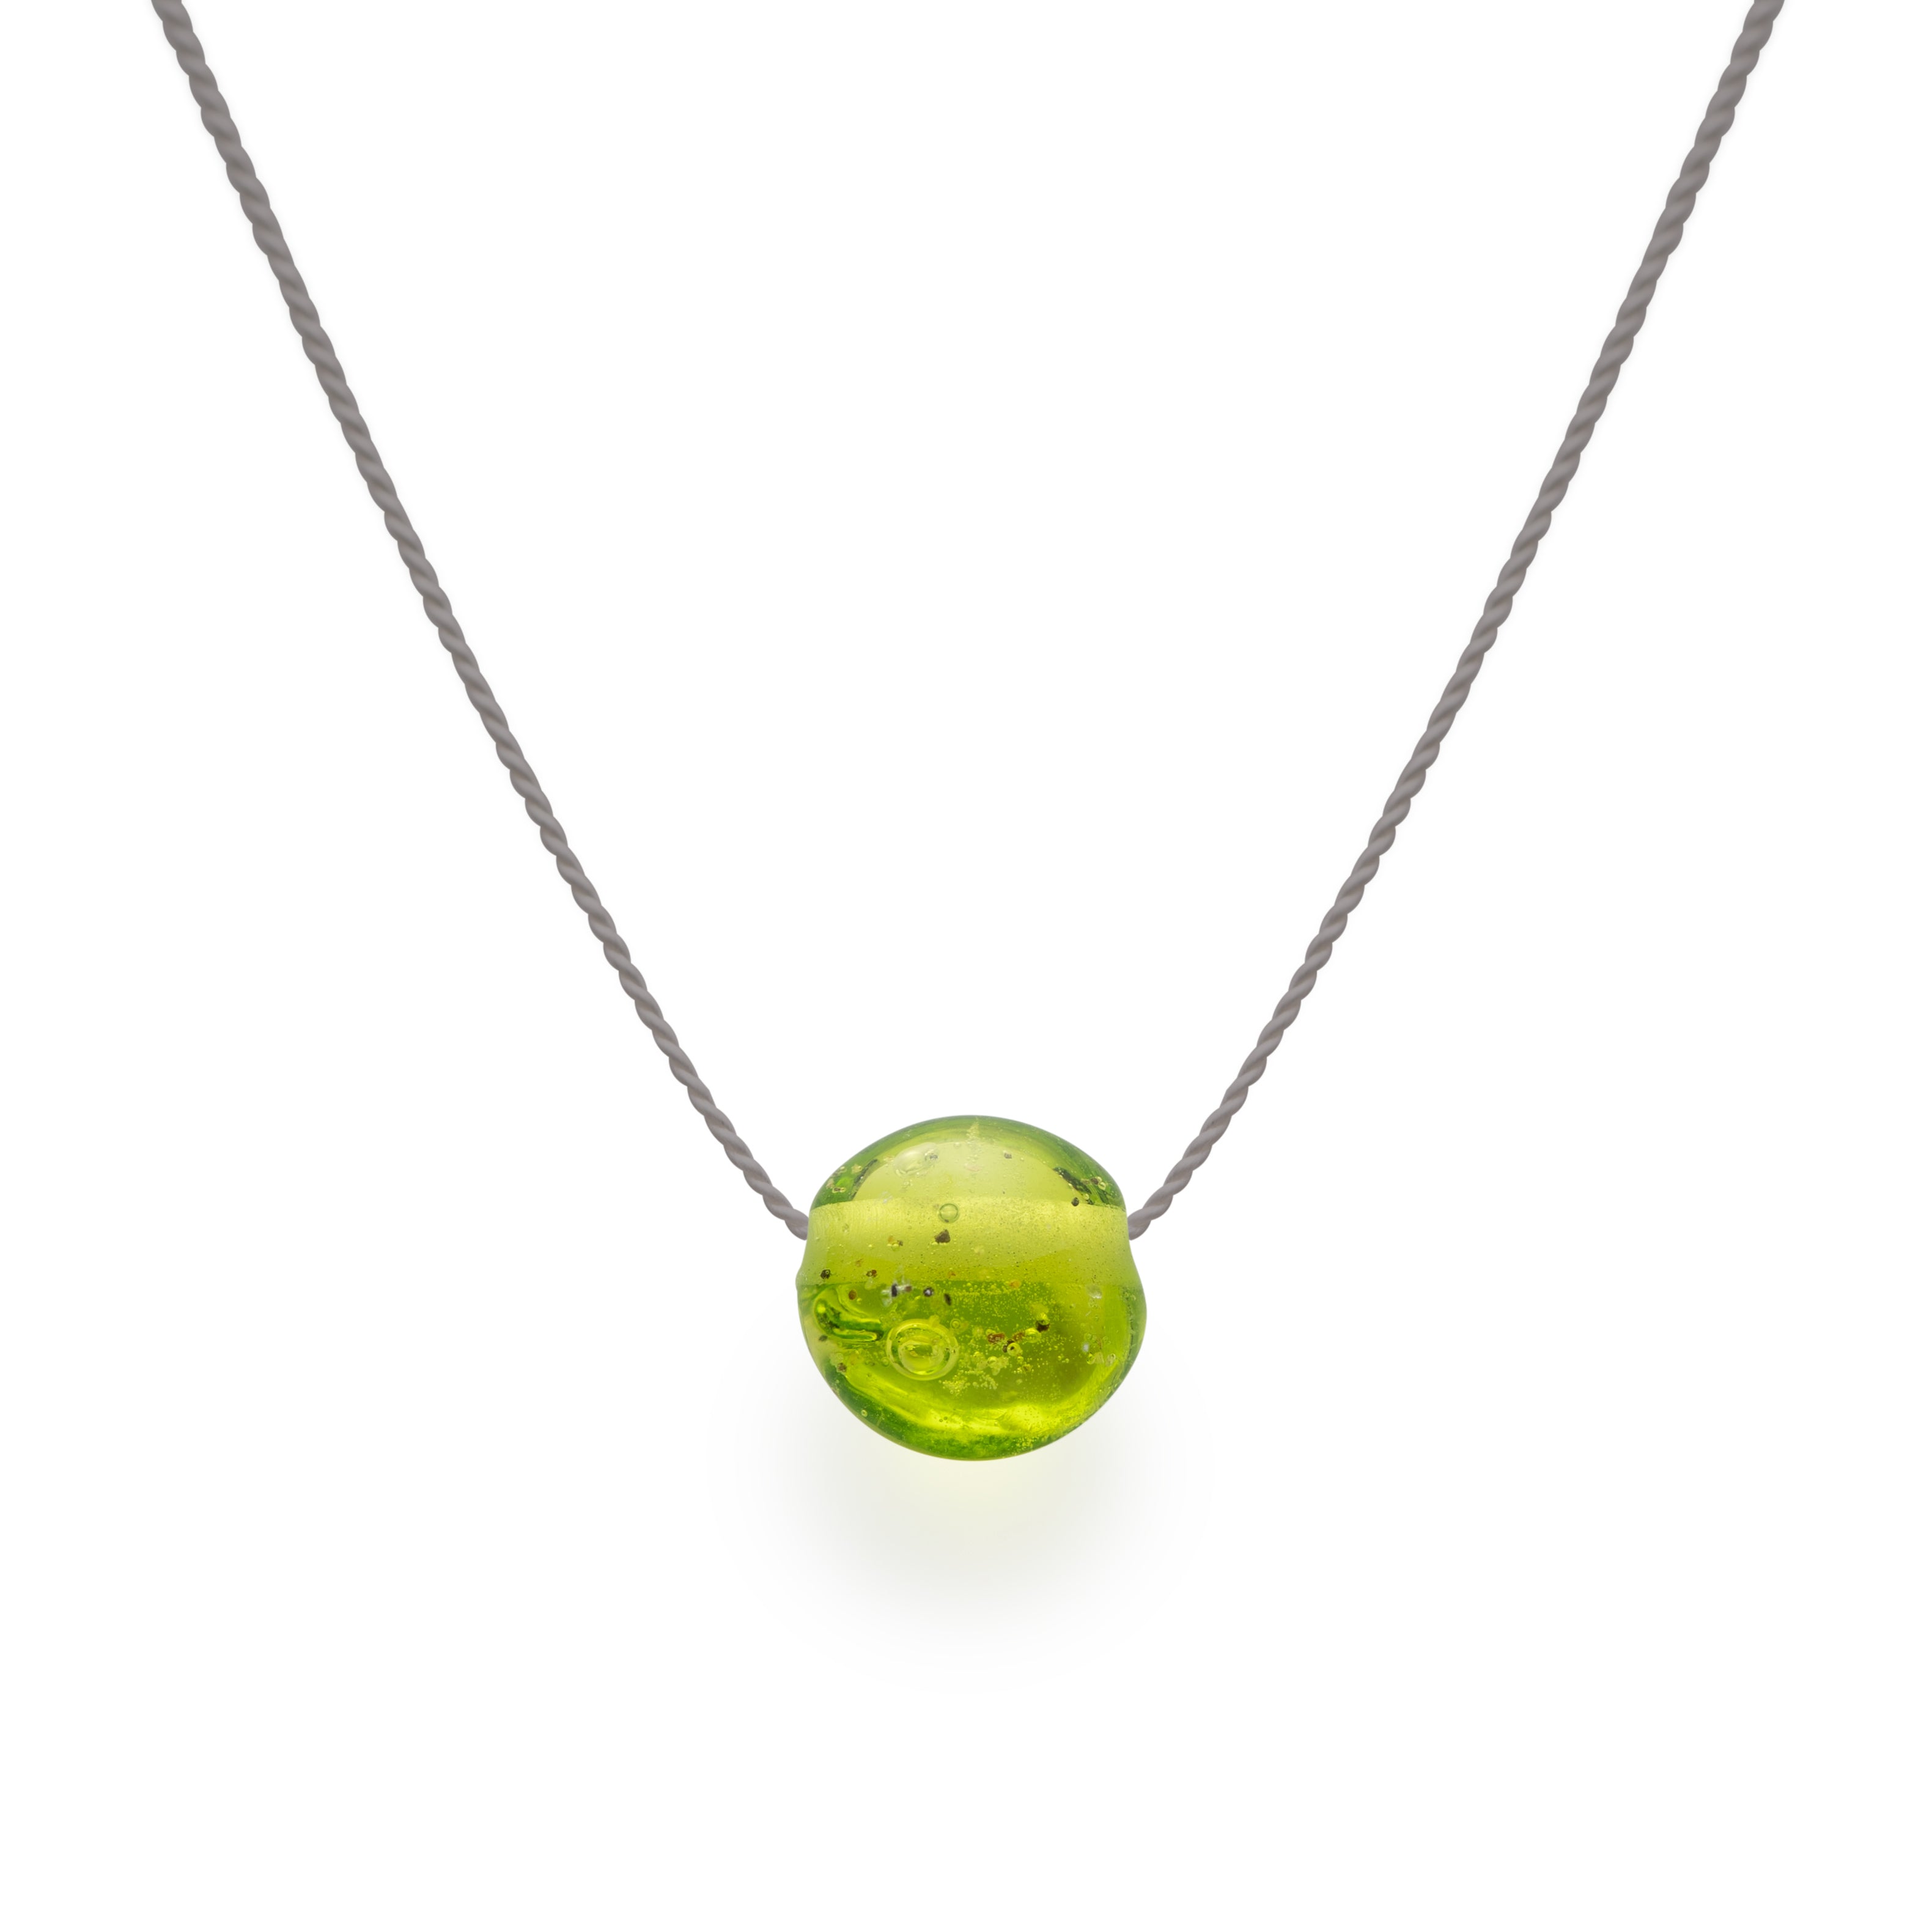 Sand Pebble Necklace - Apple Green